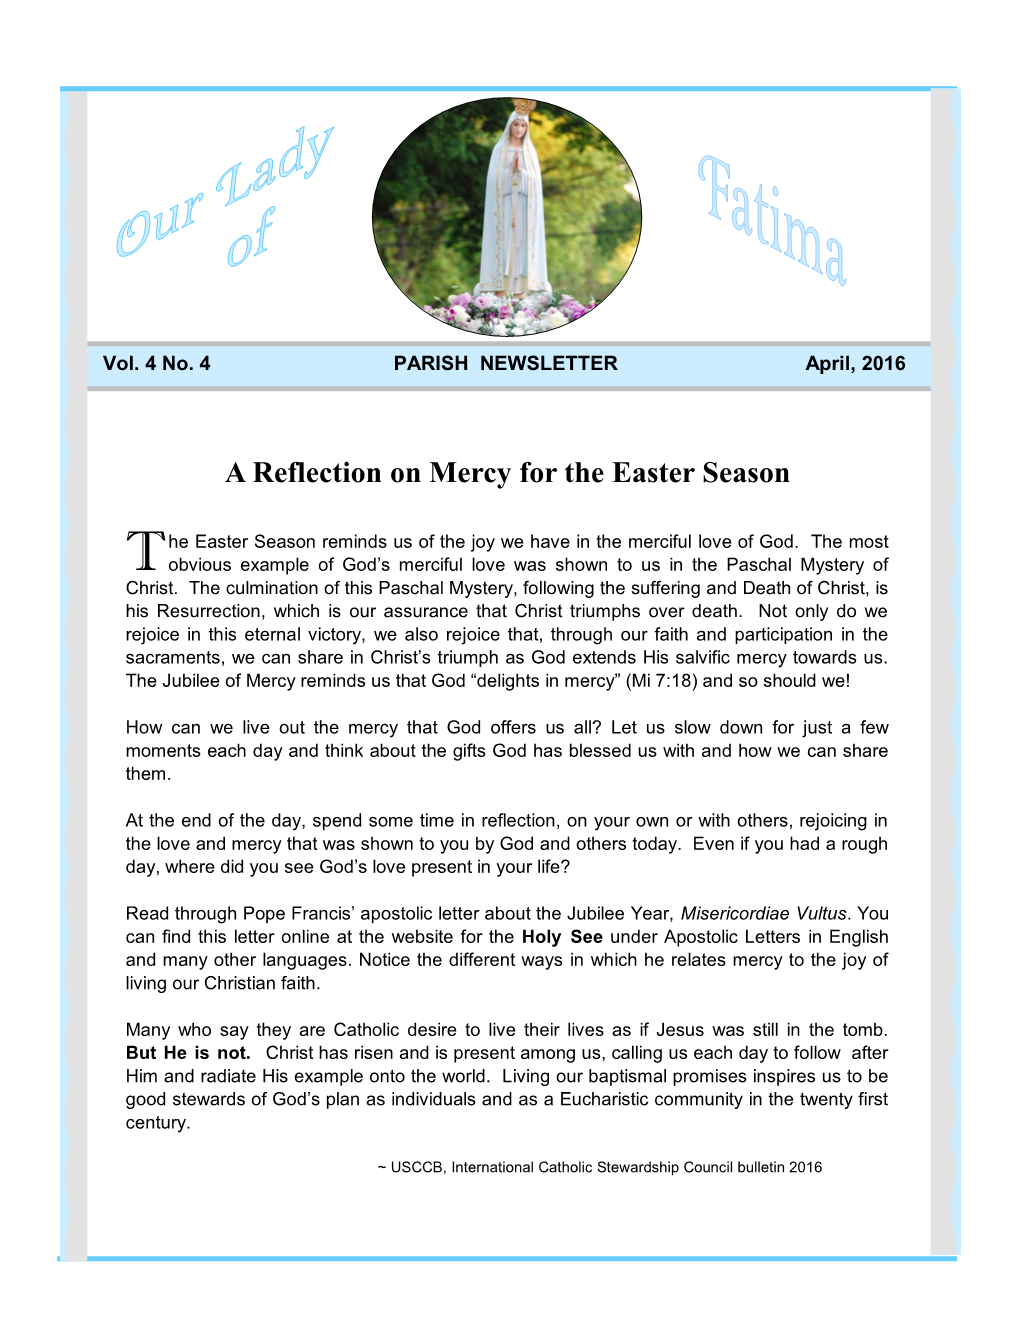 A Reflection on Mercy for the Easter Season